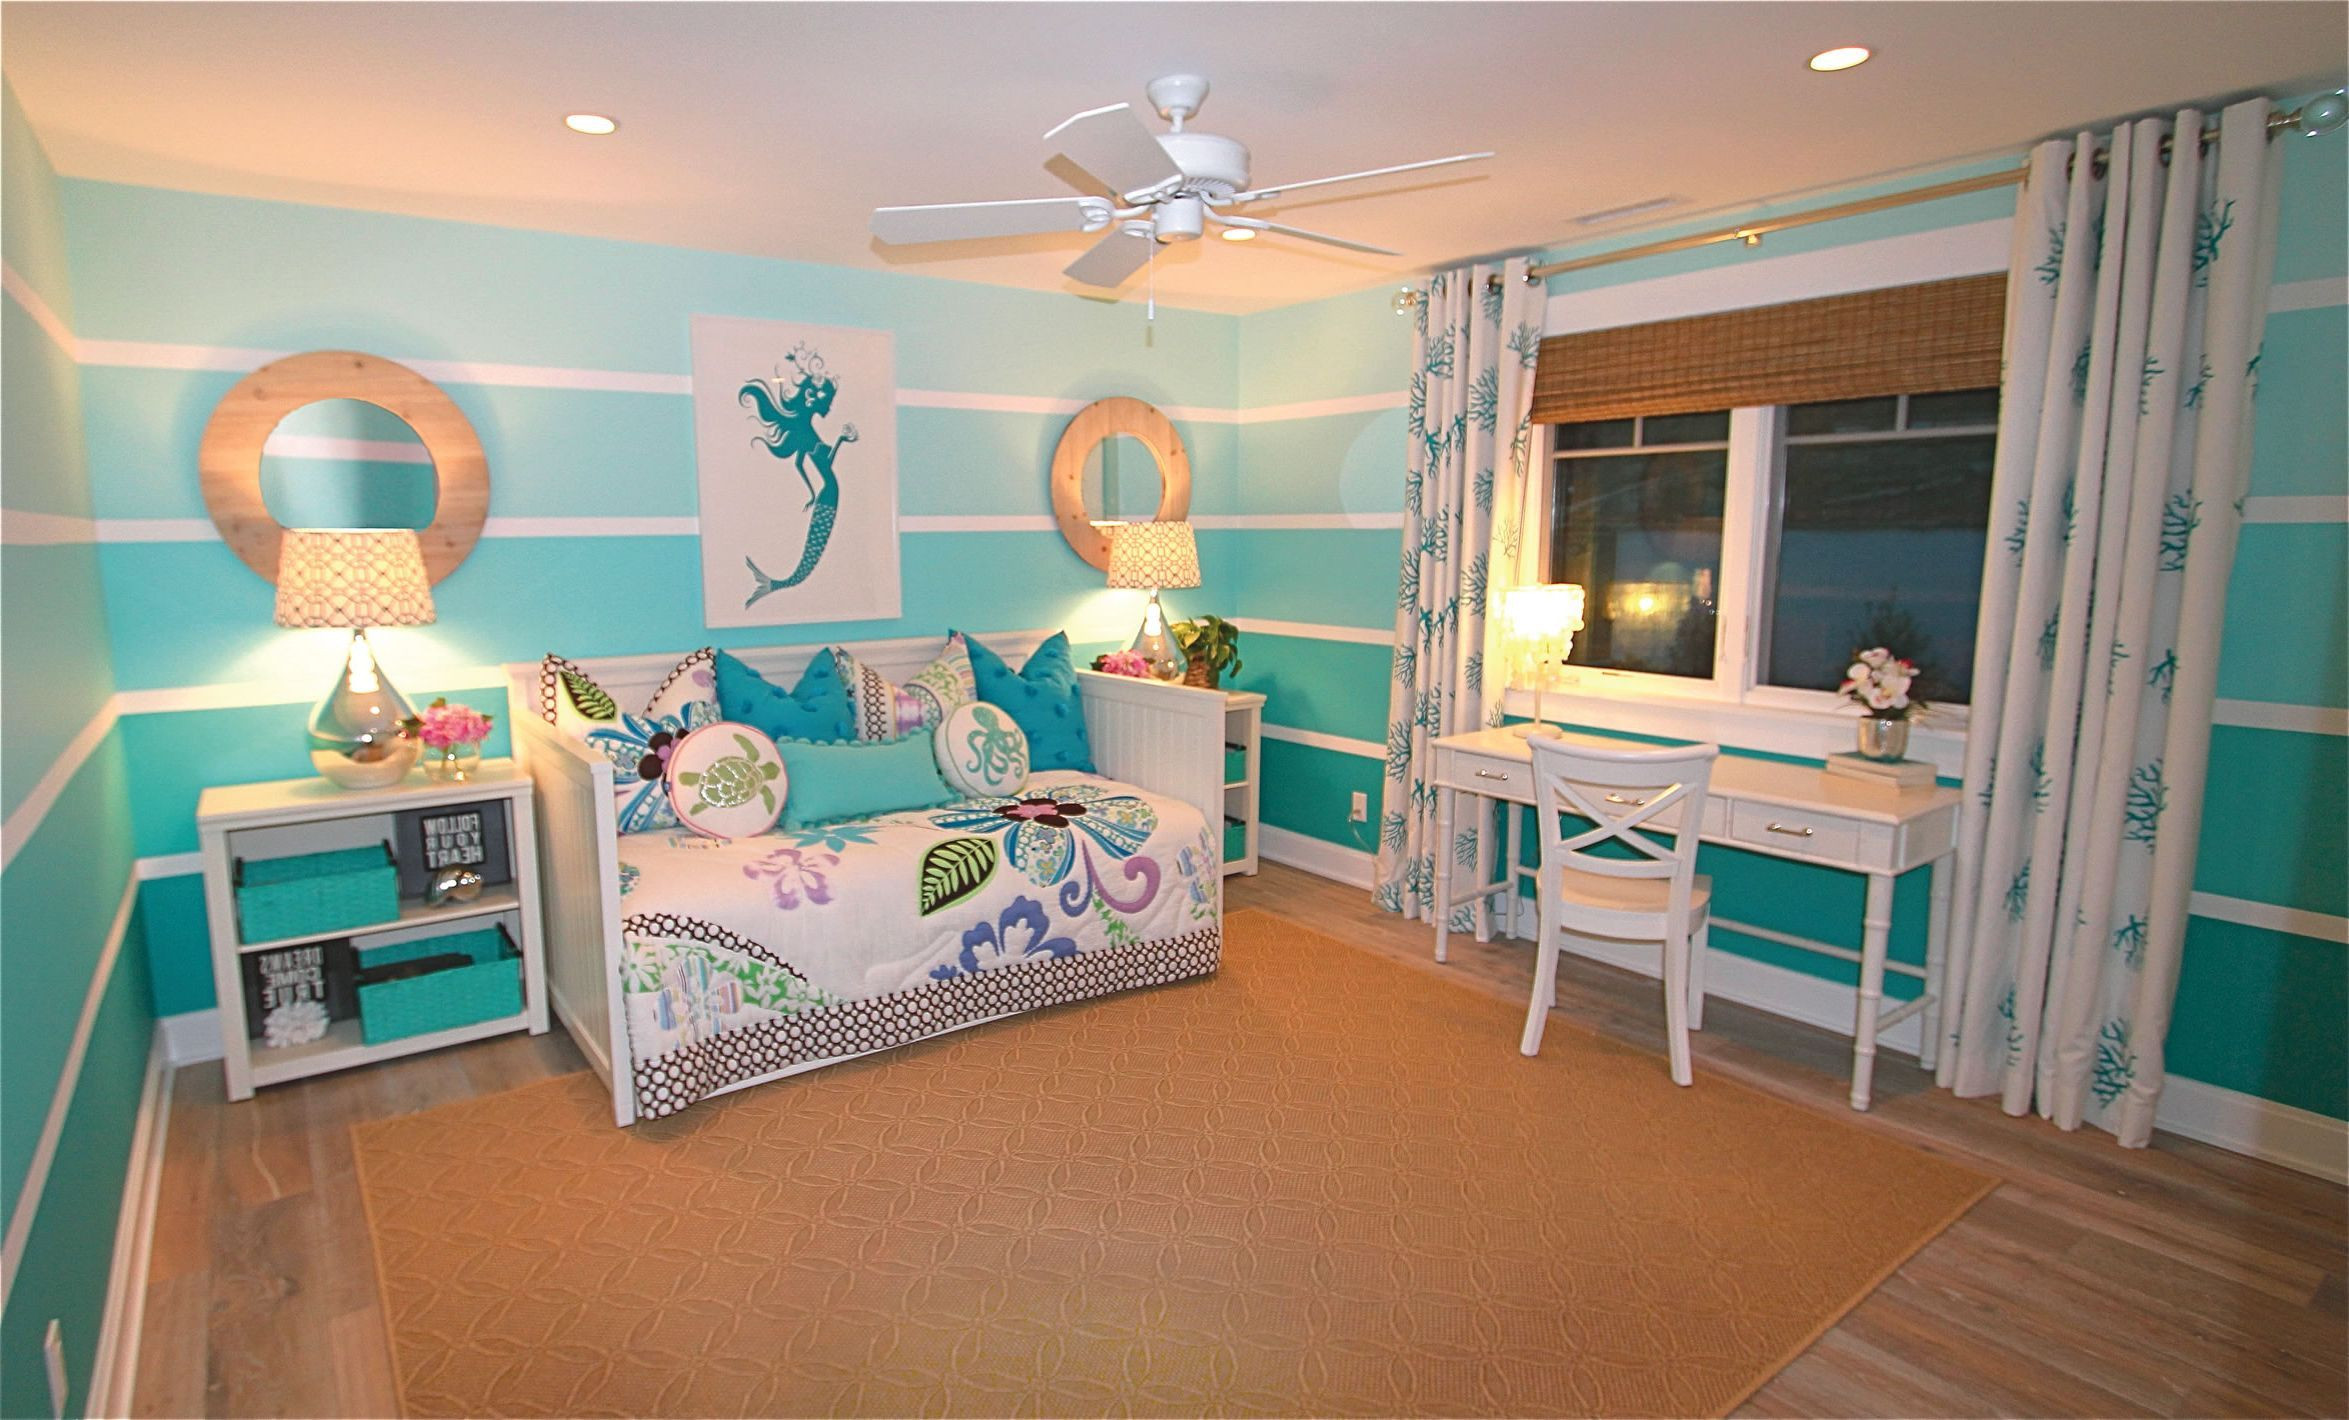 Beach Themed Kids Bedroom
 Some Breathtaking Great Room With Coastal Theme